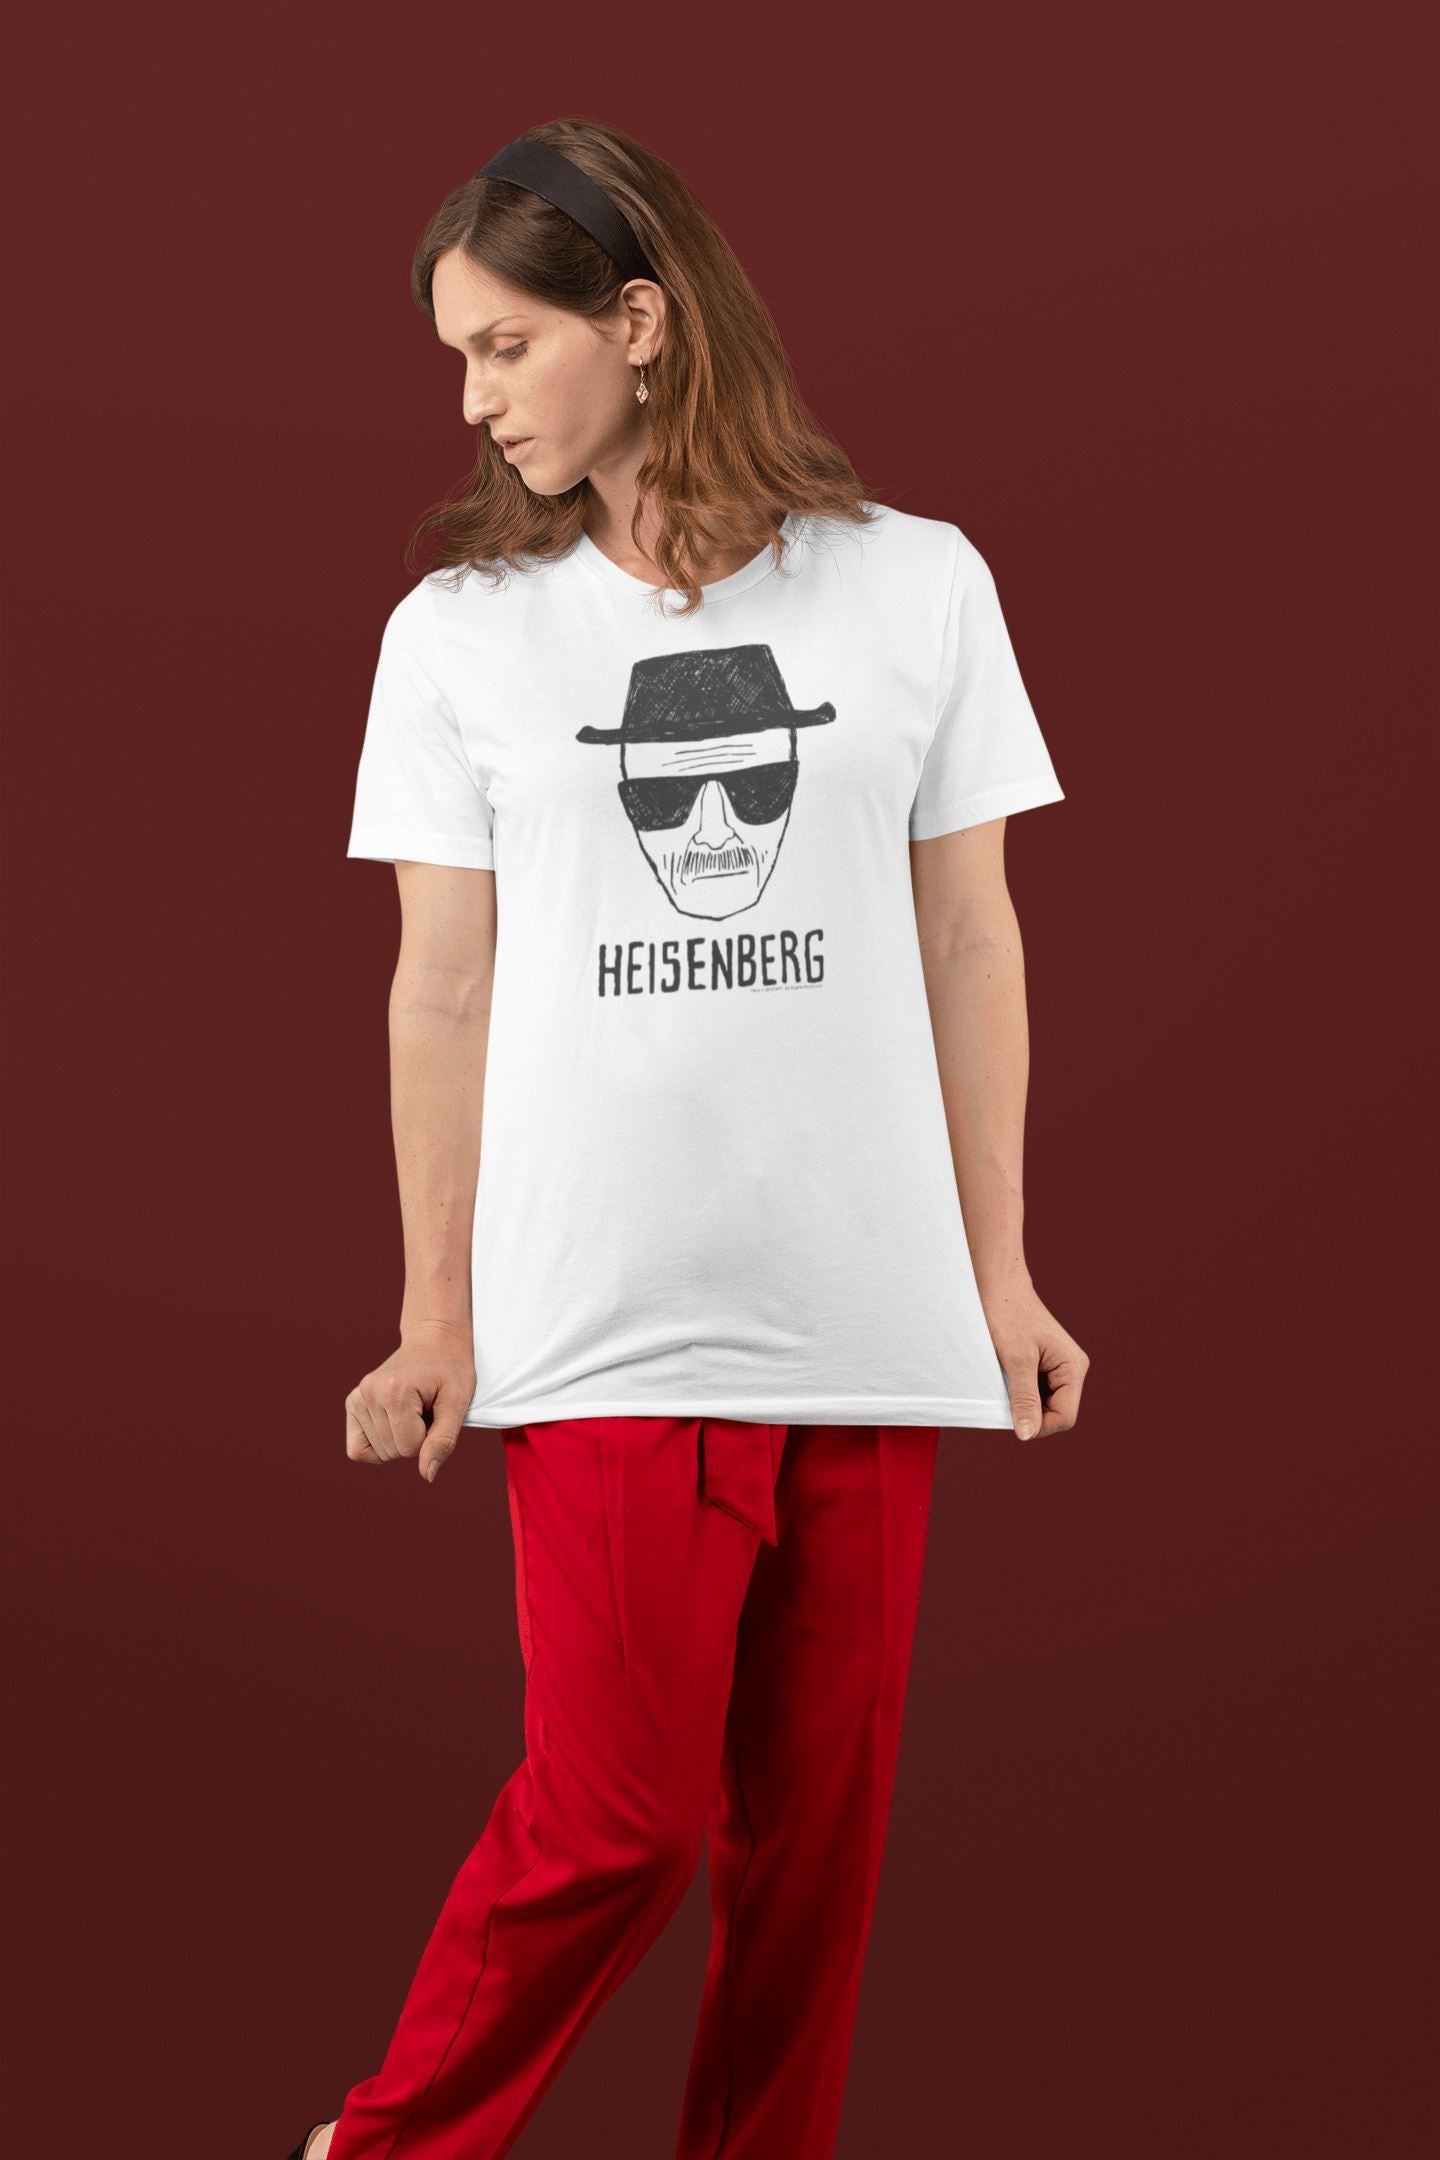 Heisenberg Official Breaking Bad T Shirt for Men and Women | Premium Design | Catch My Drift India - Catch My Drift India  breaking bad, clothing, female, made in india, movies, shirt, t shir